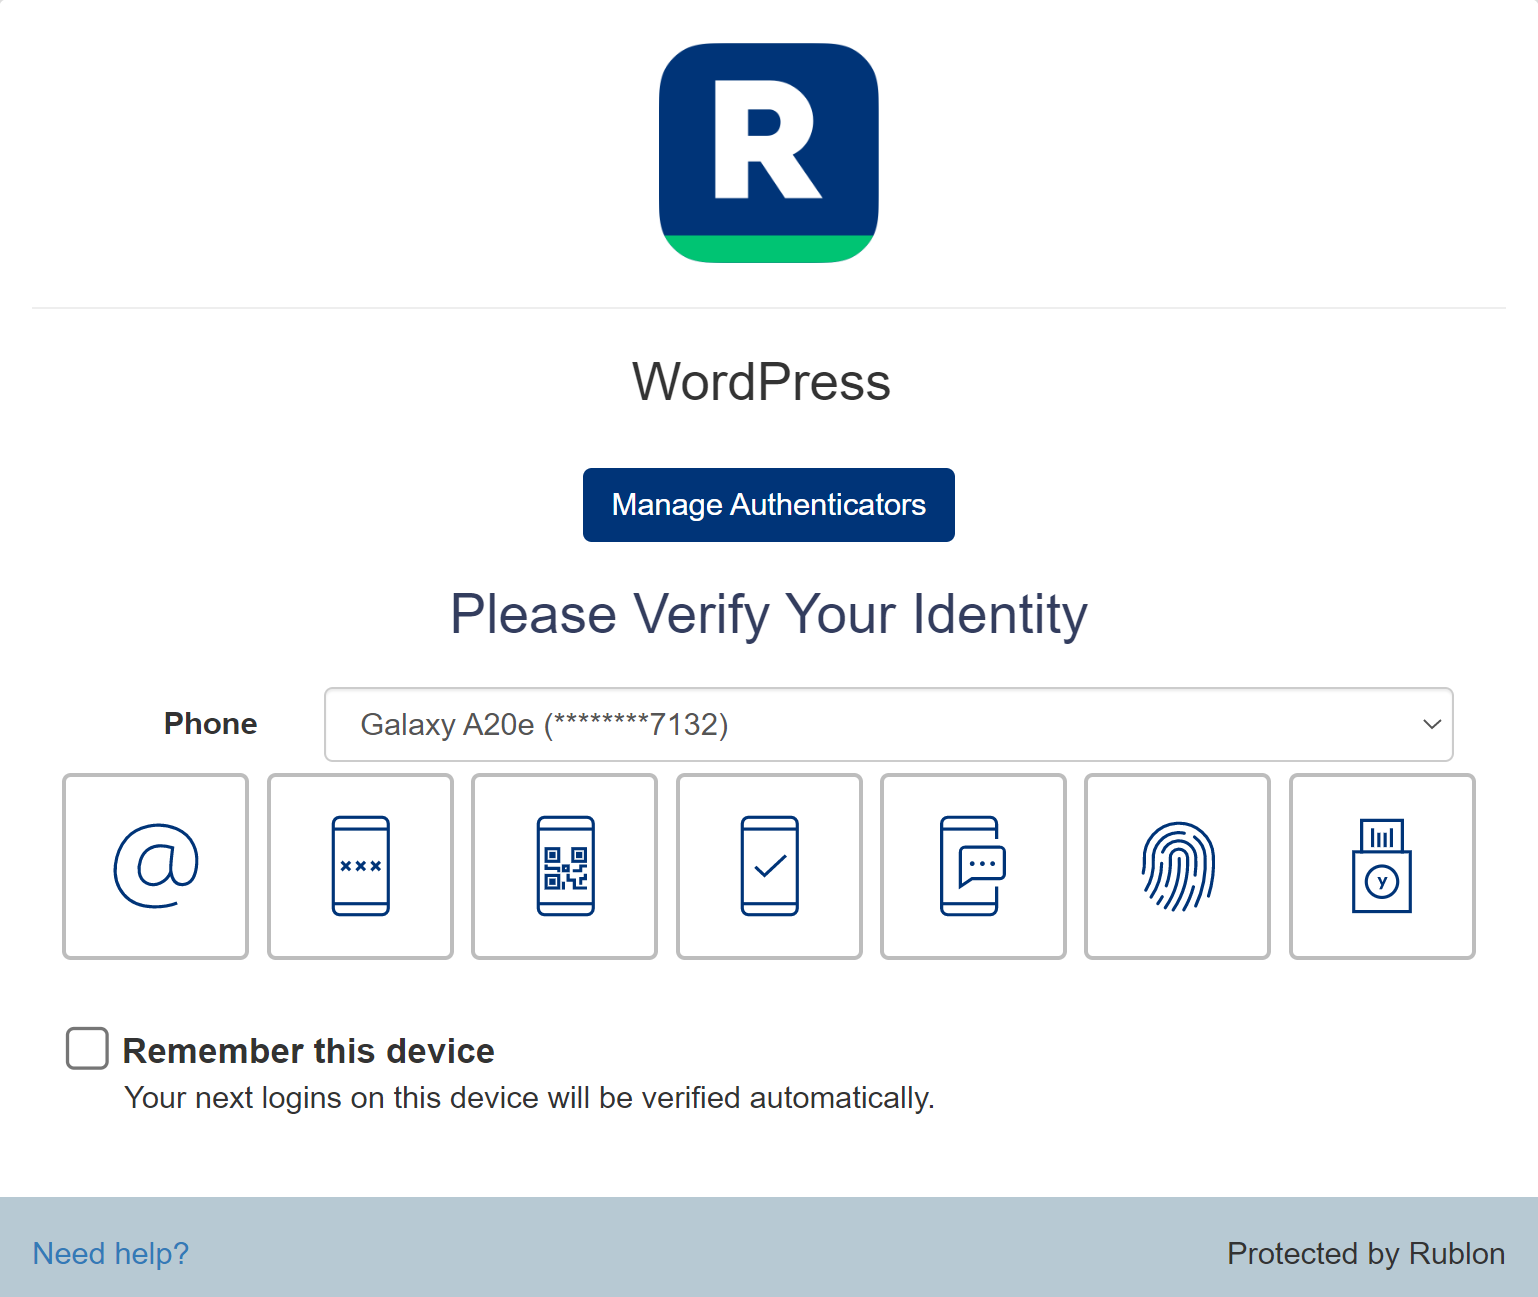 Confirm your identity by approving a Mobile Push notification using the Rublon Authenticator mobile app